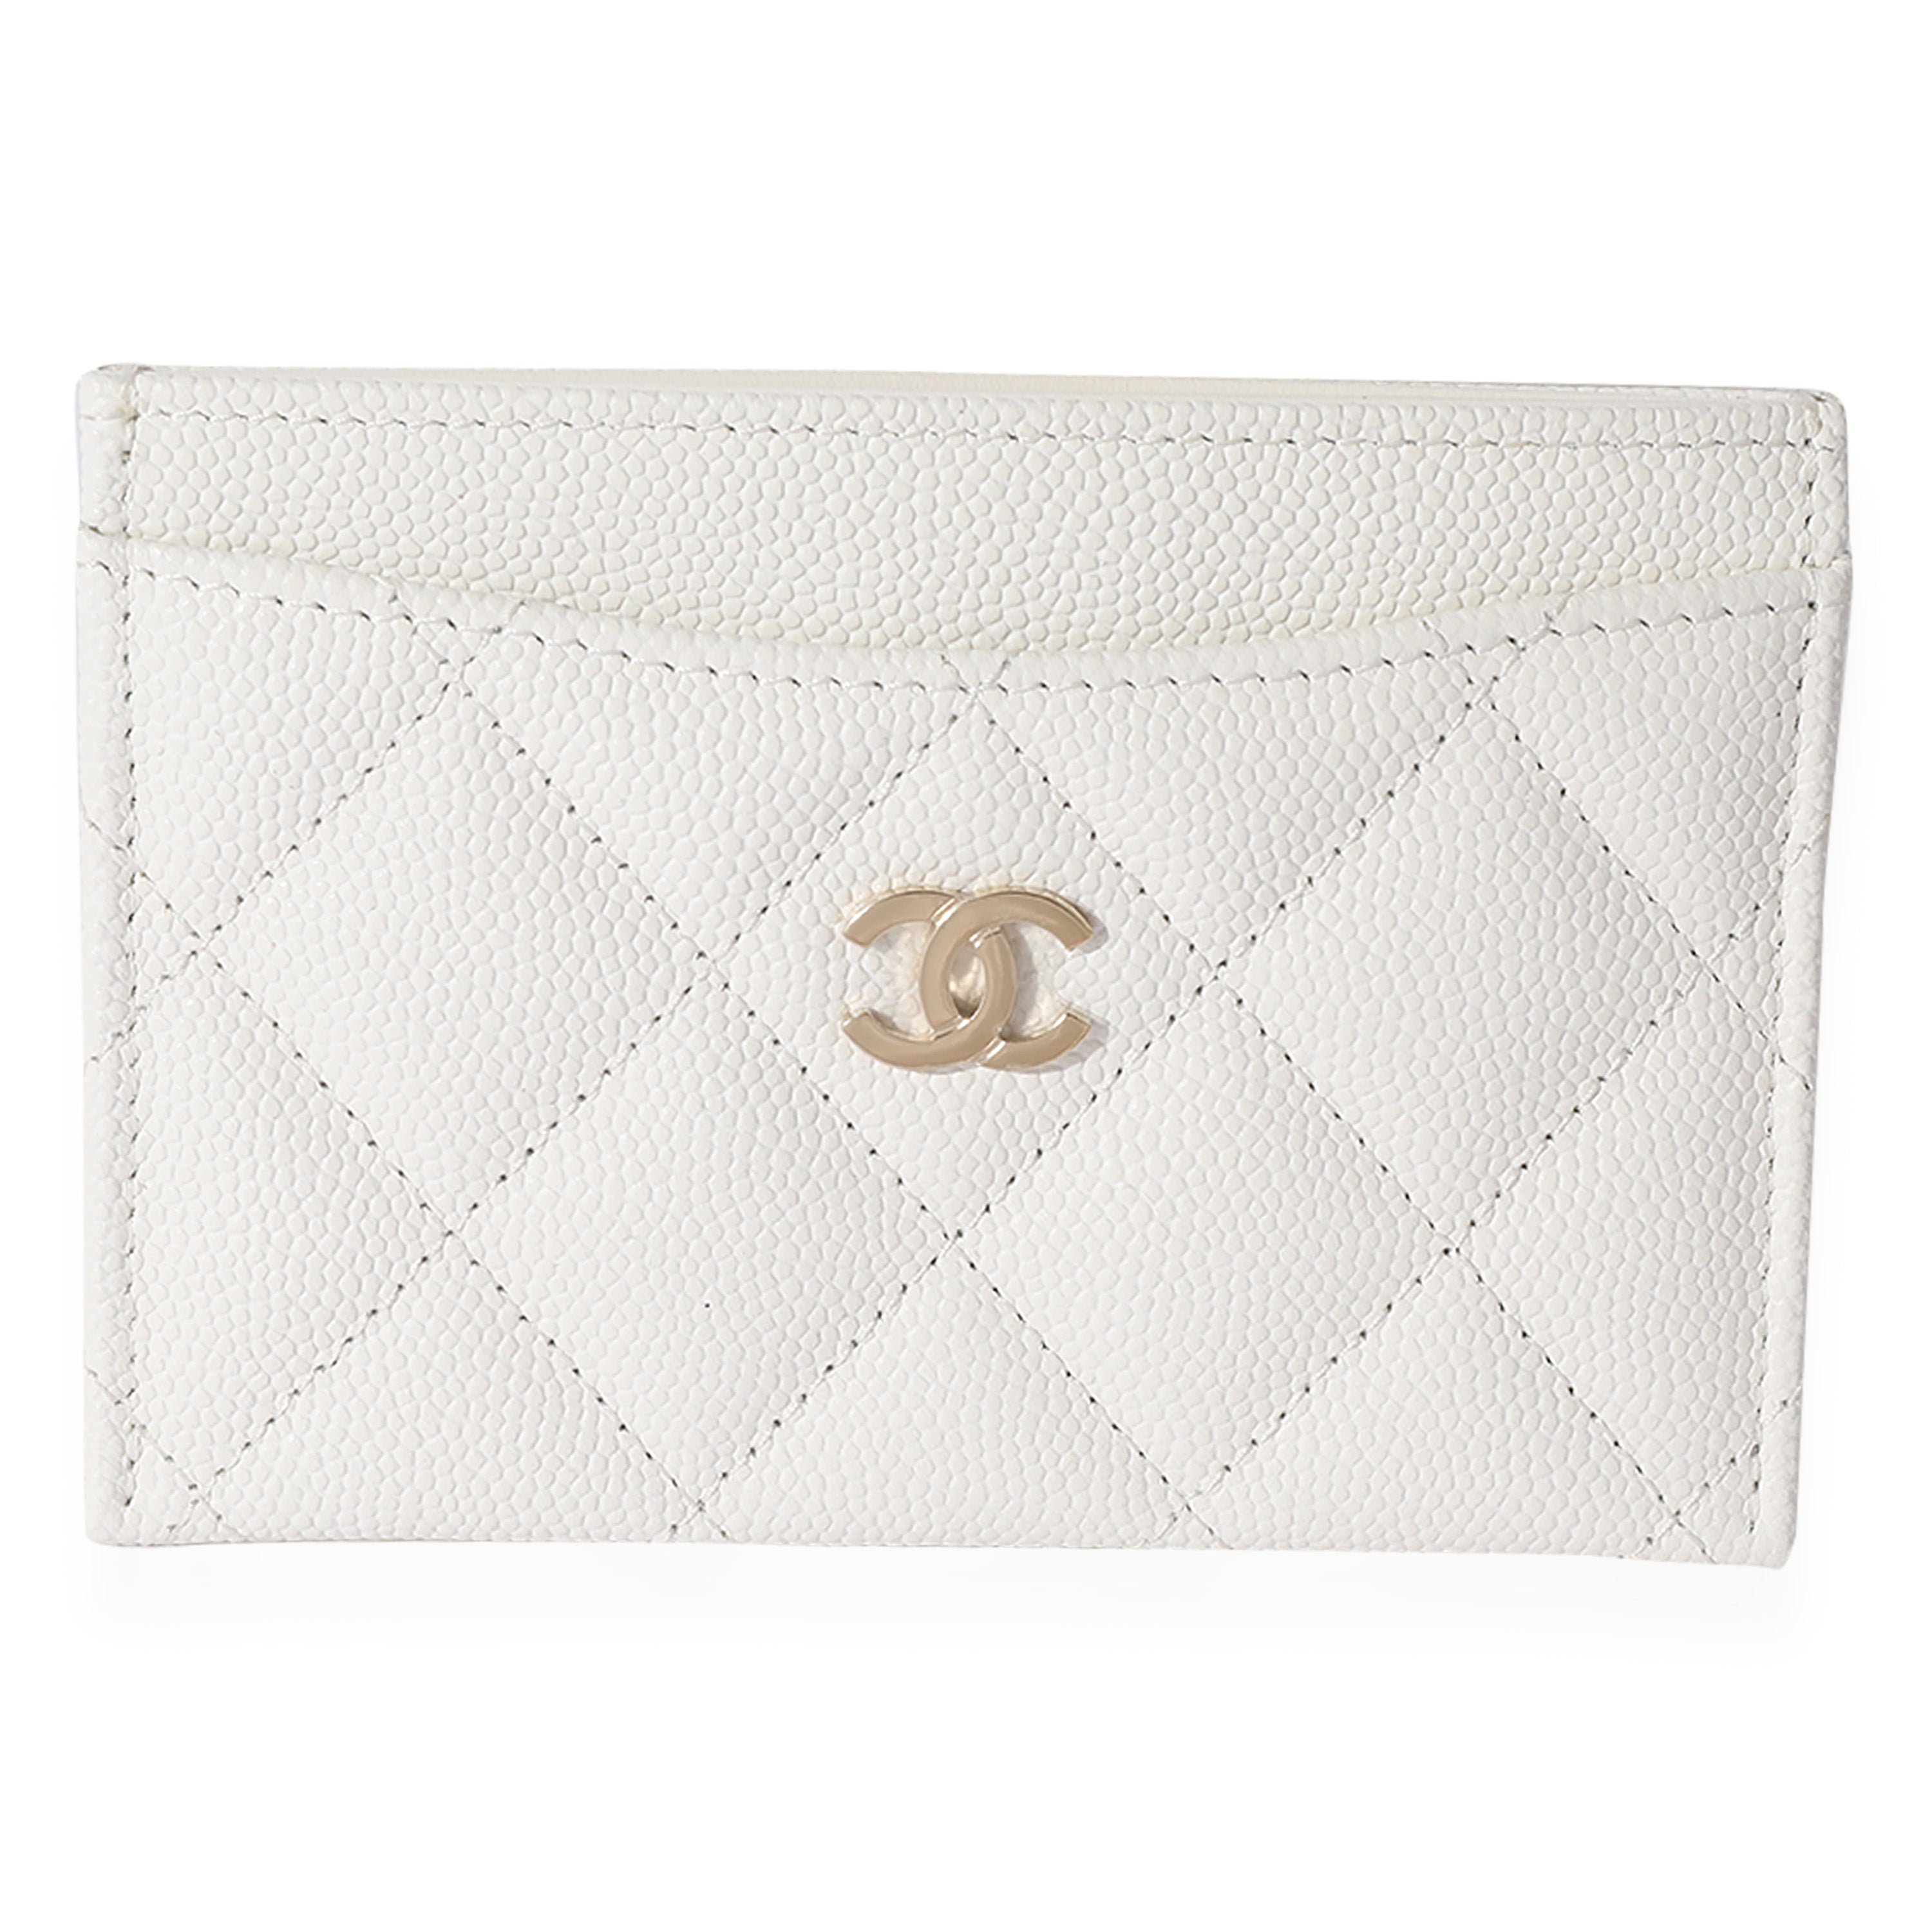 Chanel Burgundy Quilted Caviar Leather Classic Card Holder Chanel